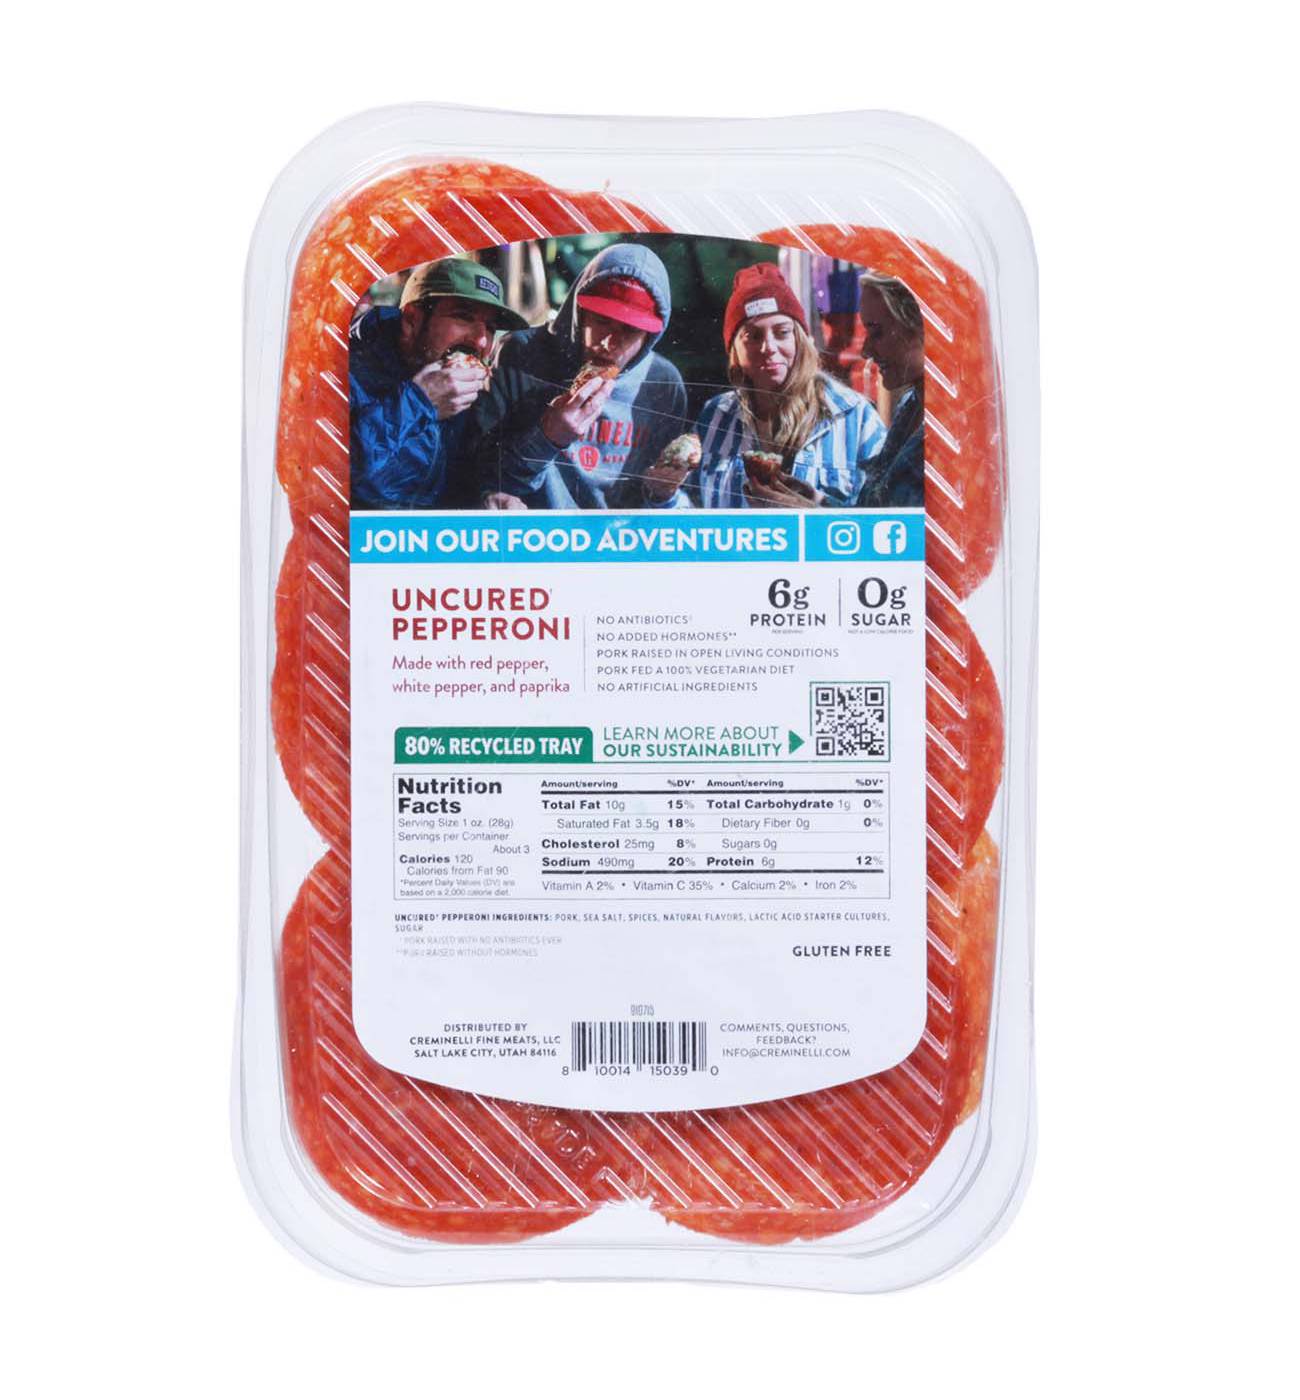 Creminelli Fine Meats Uncured Pepperoni Slices; image 2 of 2